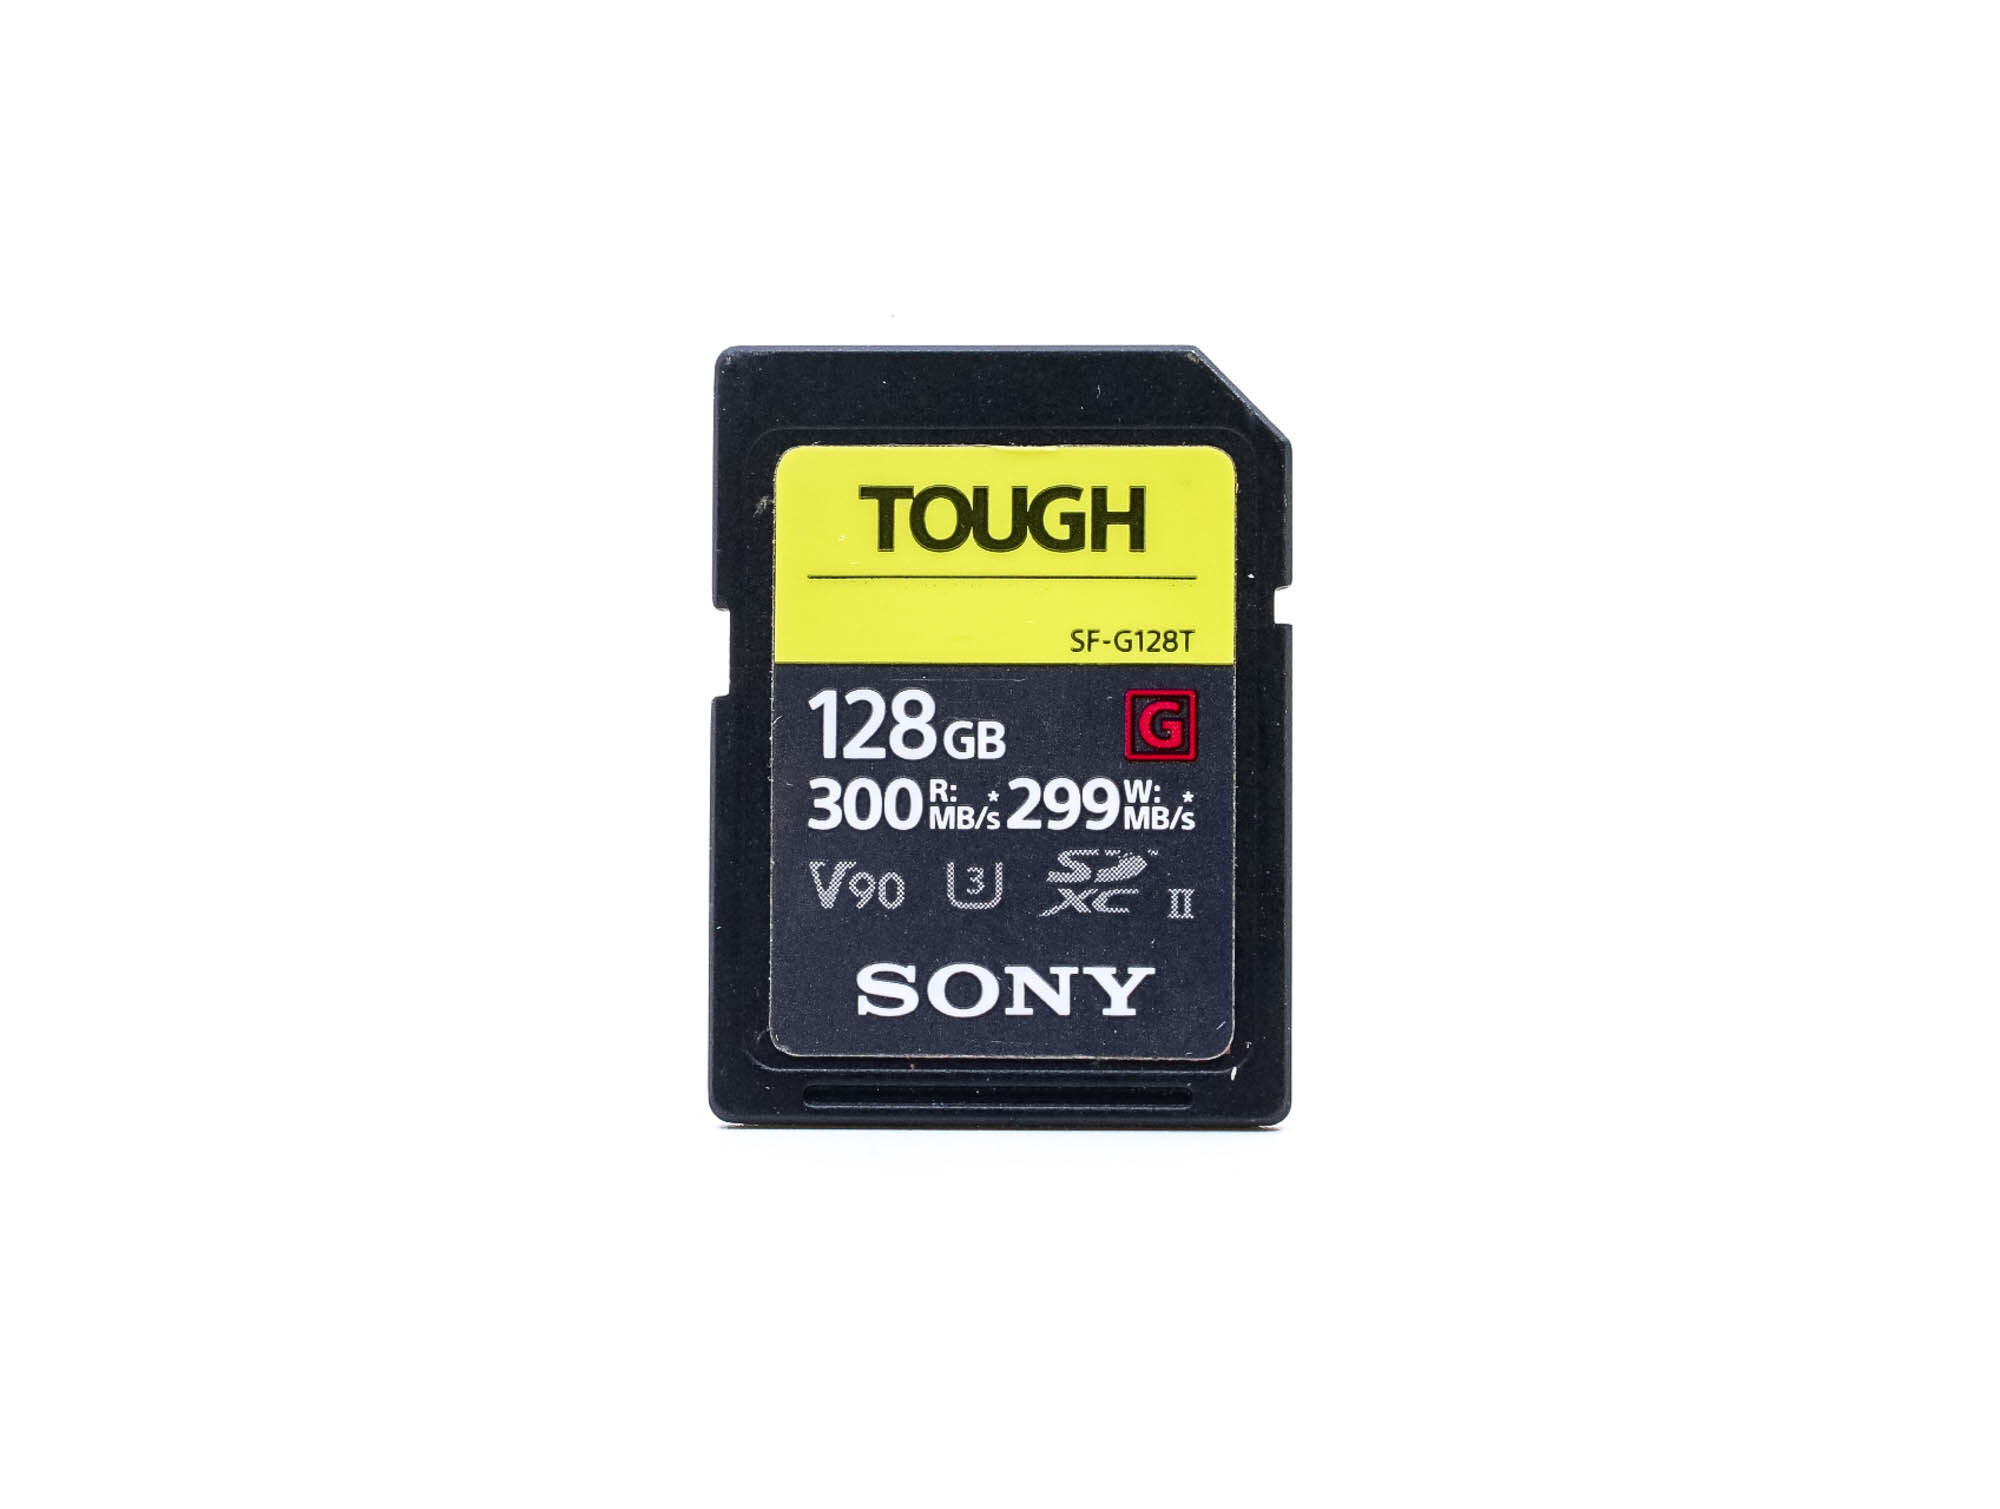 Sony 128GB SF-G Tough SDXC Card (Condition: Excellent)